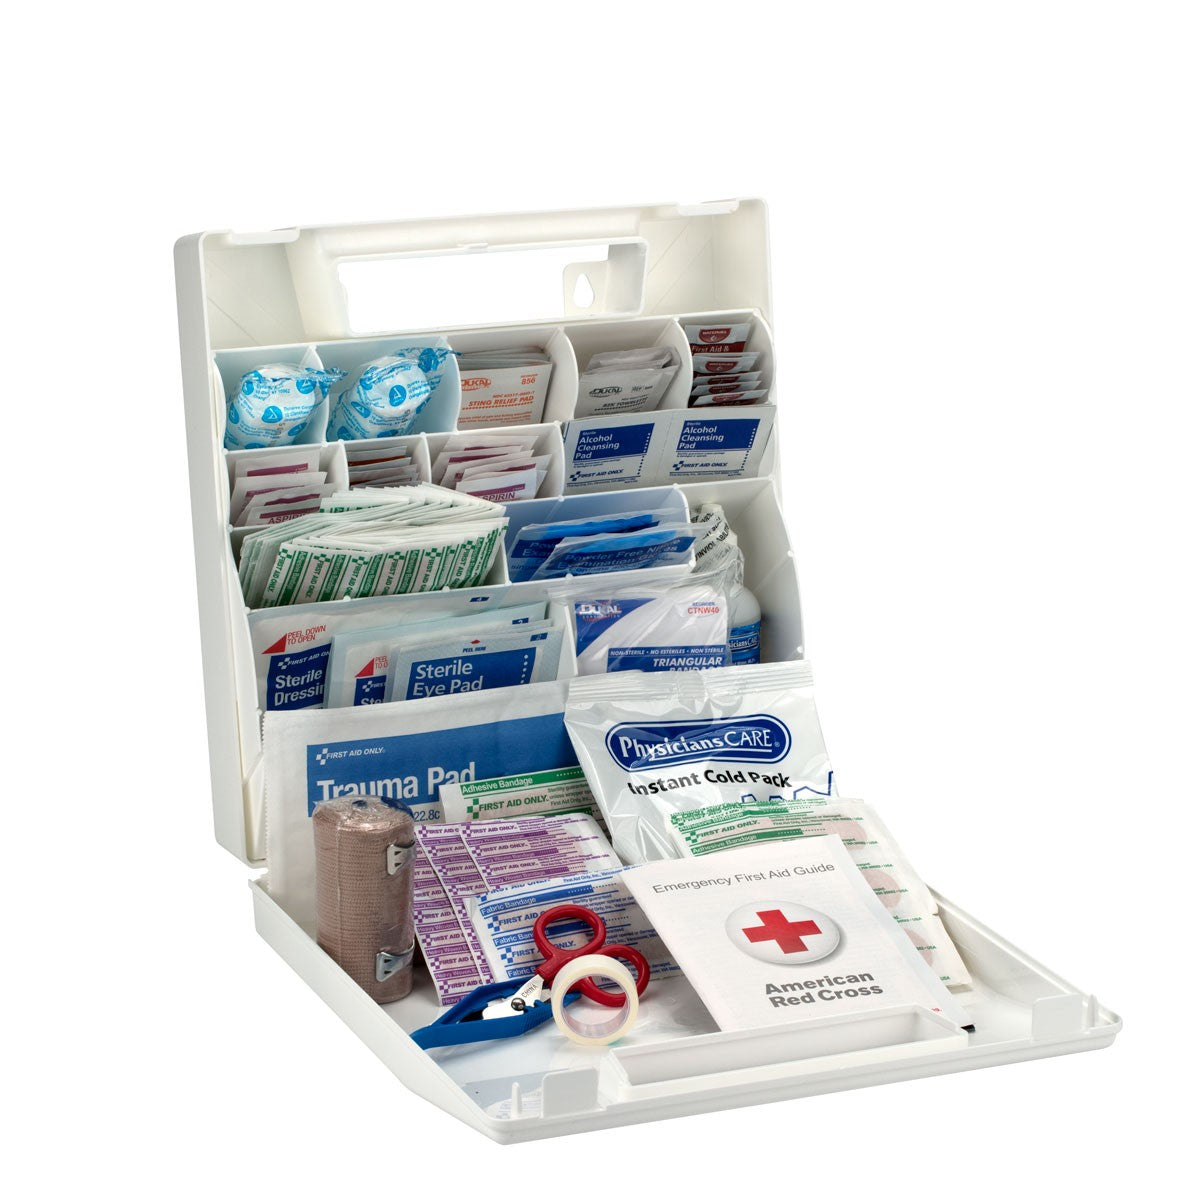 50 Person First Aid Kit, Plastic Case With Dividers - W-225-AN